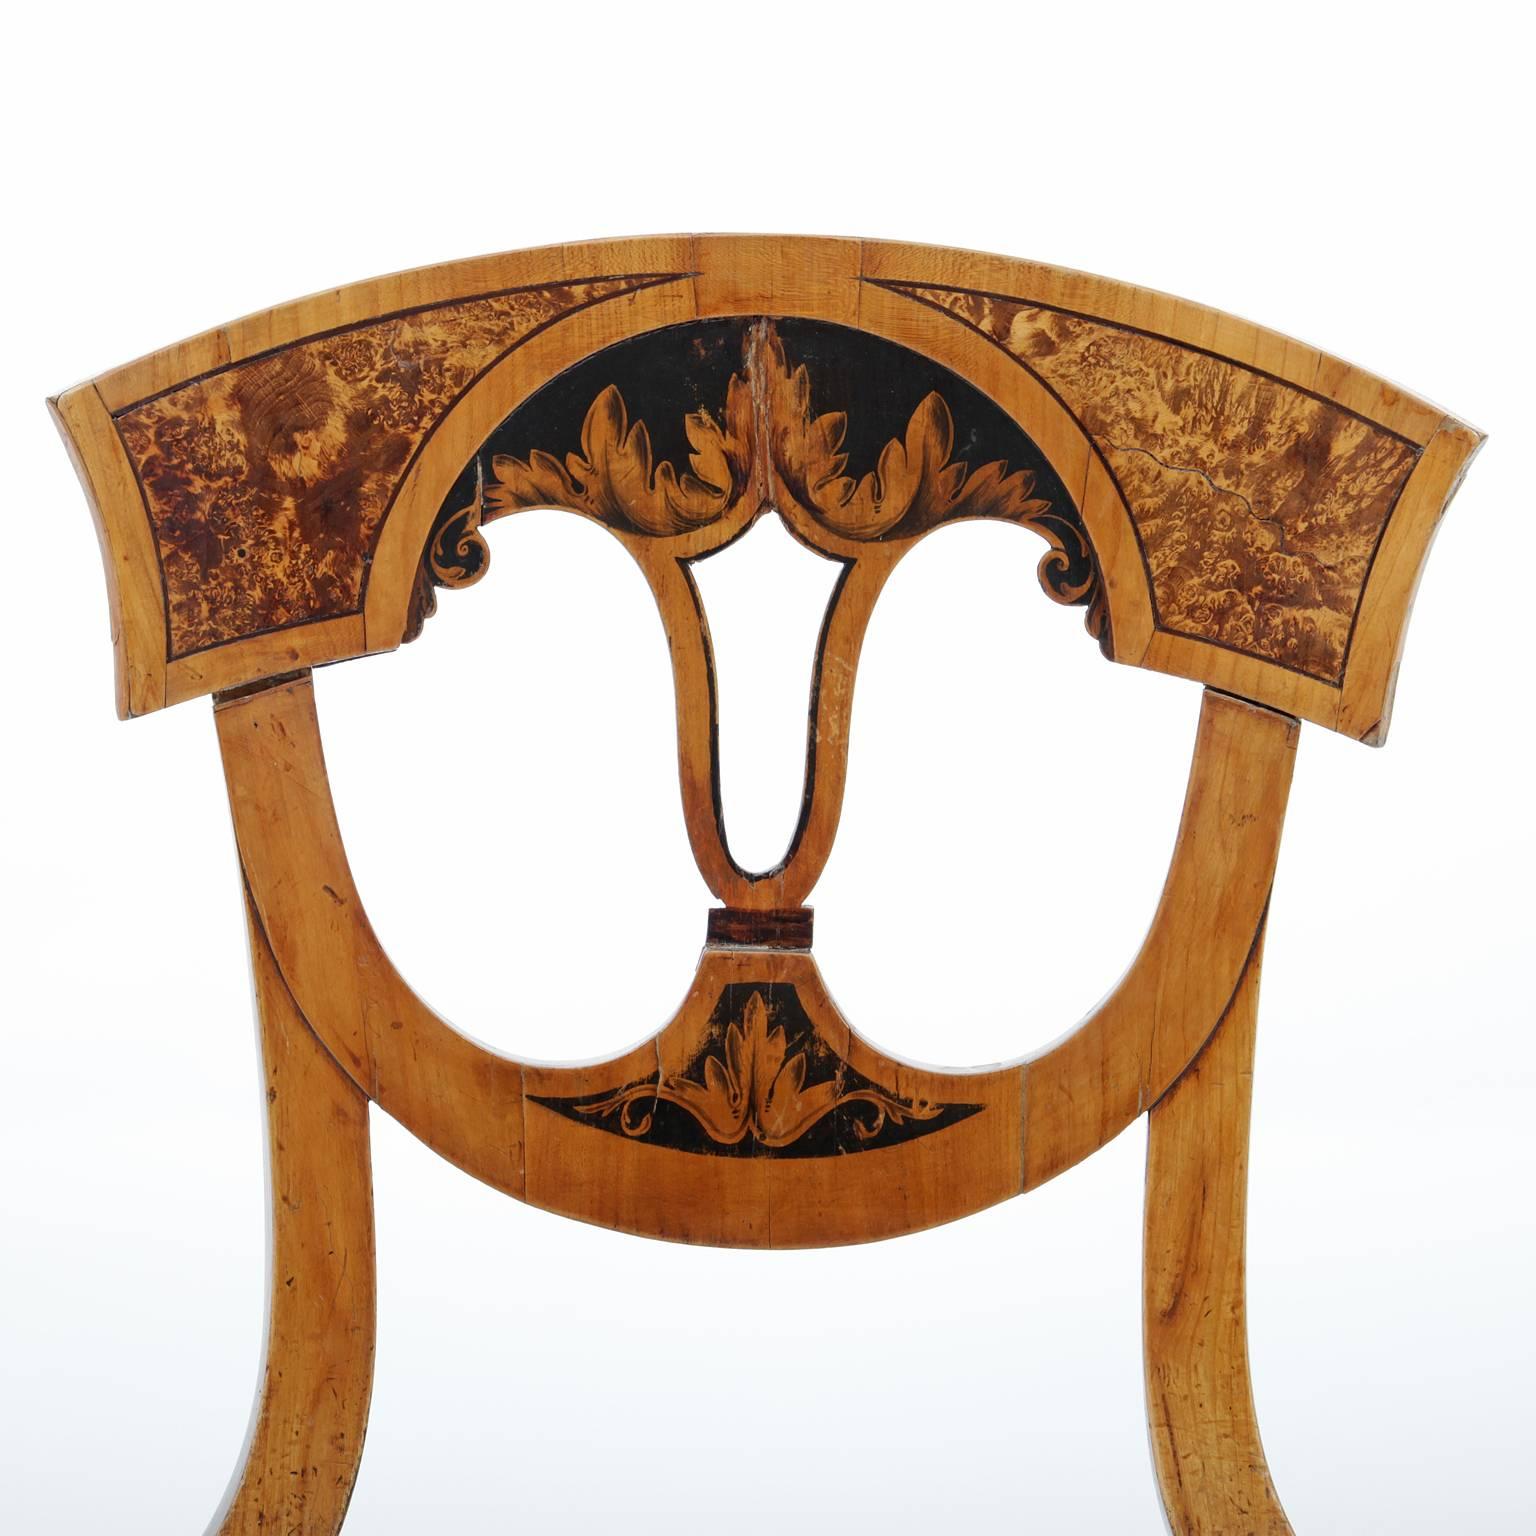 Neoclassical Dining Chairs, German, Franconia, 1820 1